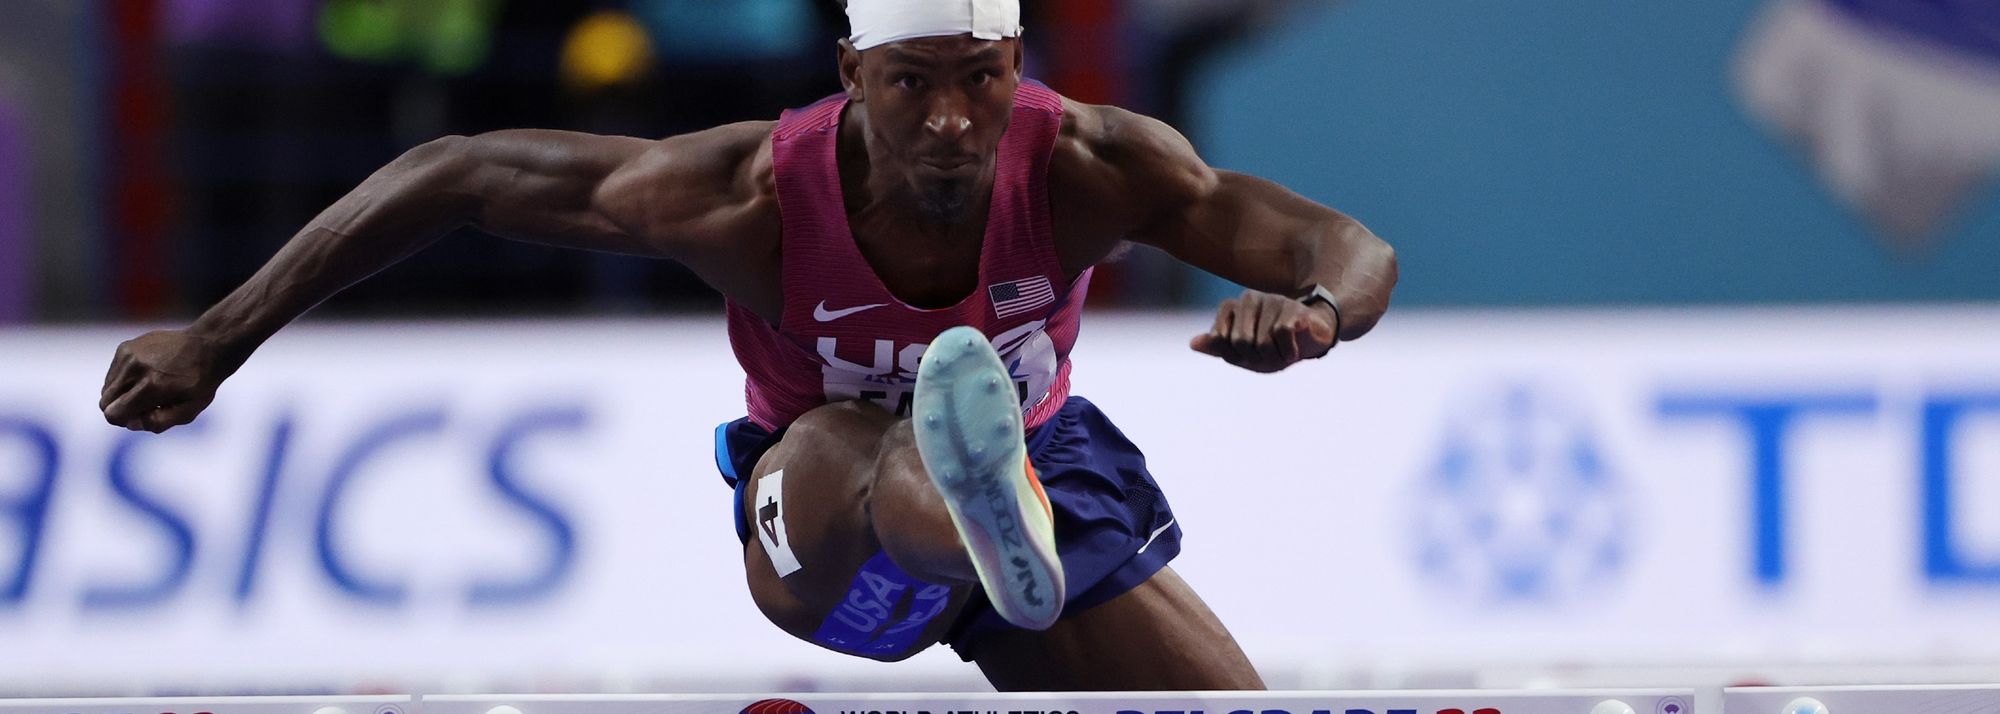 For Jarret Eaton, winning a medal at the World Athletics Indoor Championships Belgrade 22 was “the icing on the cake” at a key point in his career.